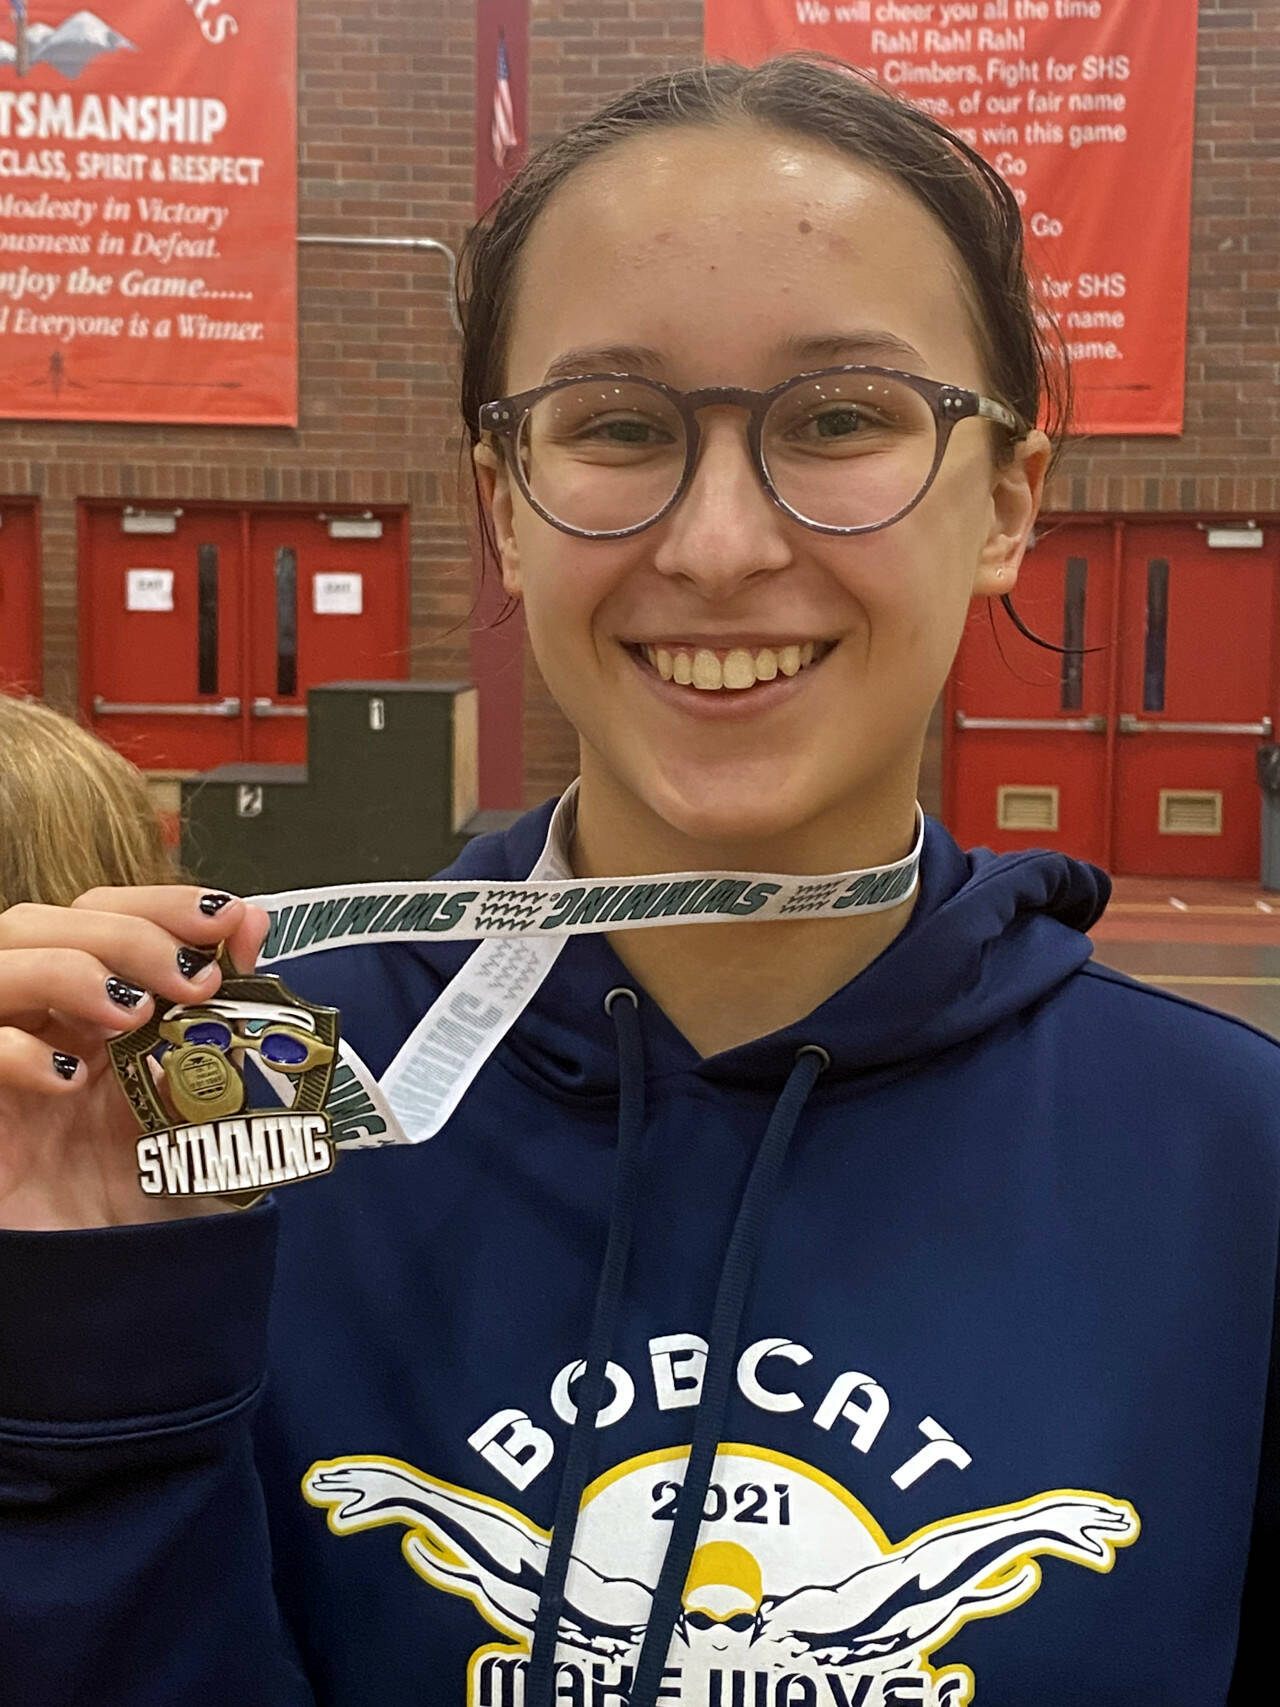 SUBMITTED PHOTO Aberdeen swimmer Anna Matisons shows off her district-championships medal after winning the 100 yard breaststroke at the 2A/1A District 4 Girls Swim & Dive Championship Meet on Saturday at Shelton High School.